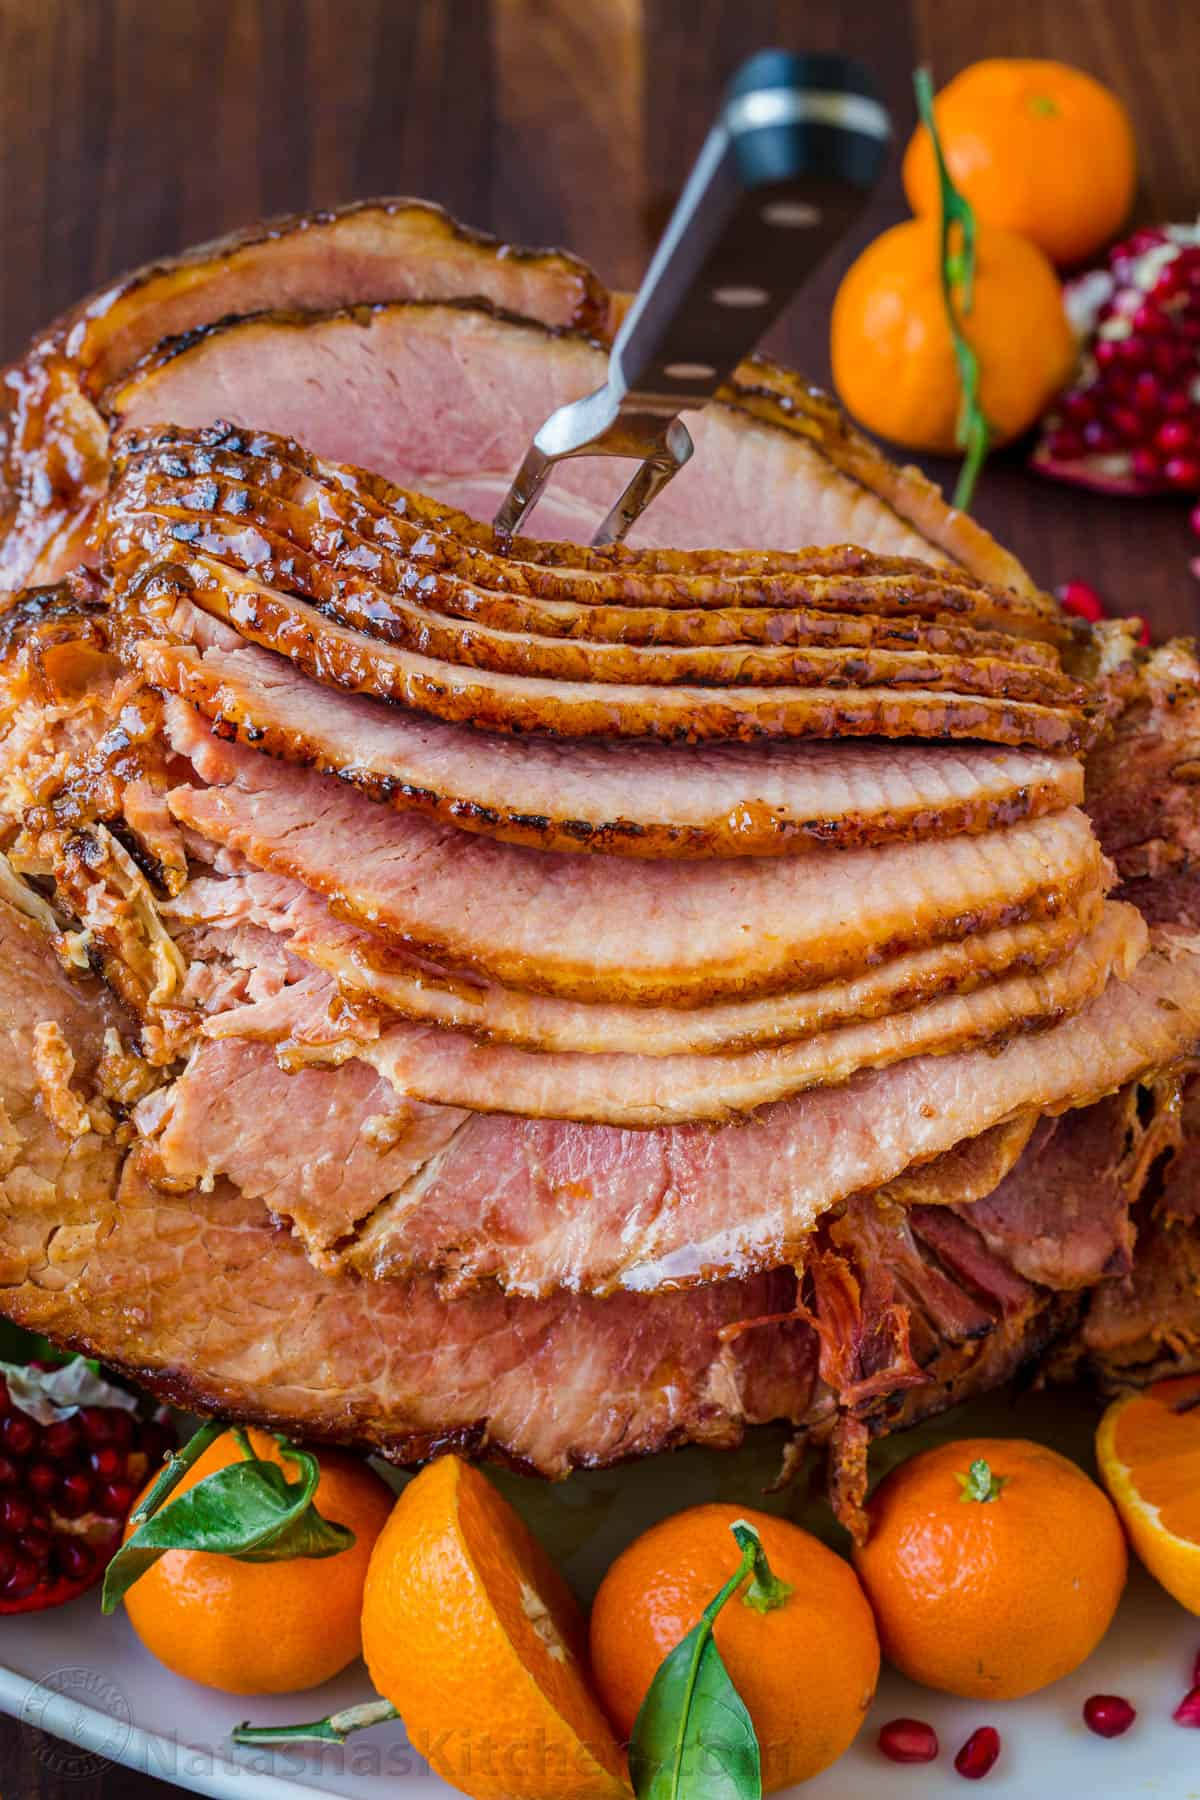 Baked Ham With Oranges